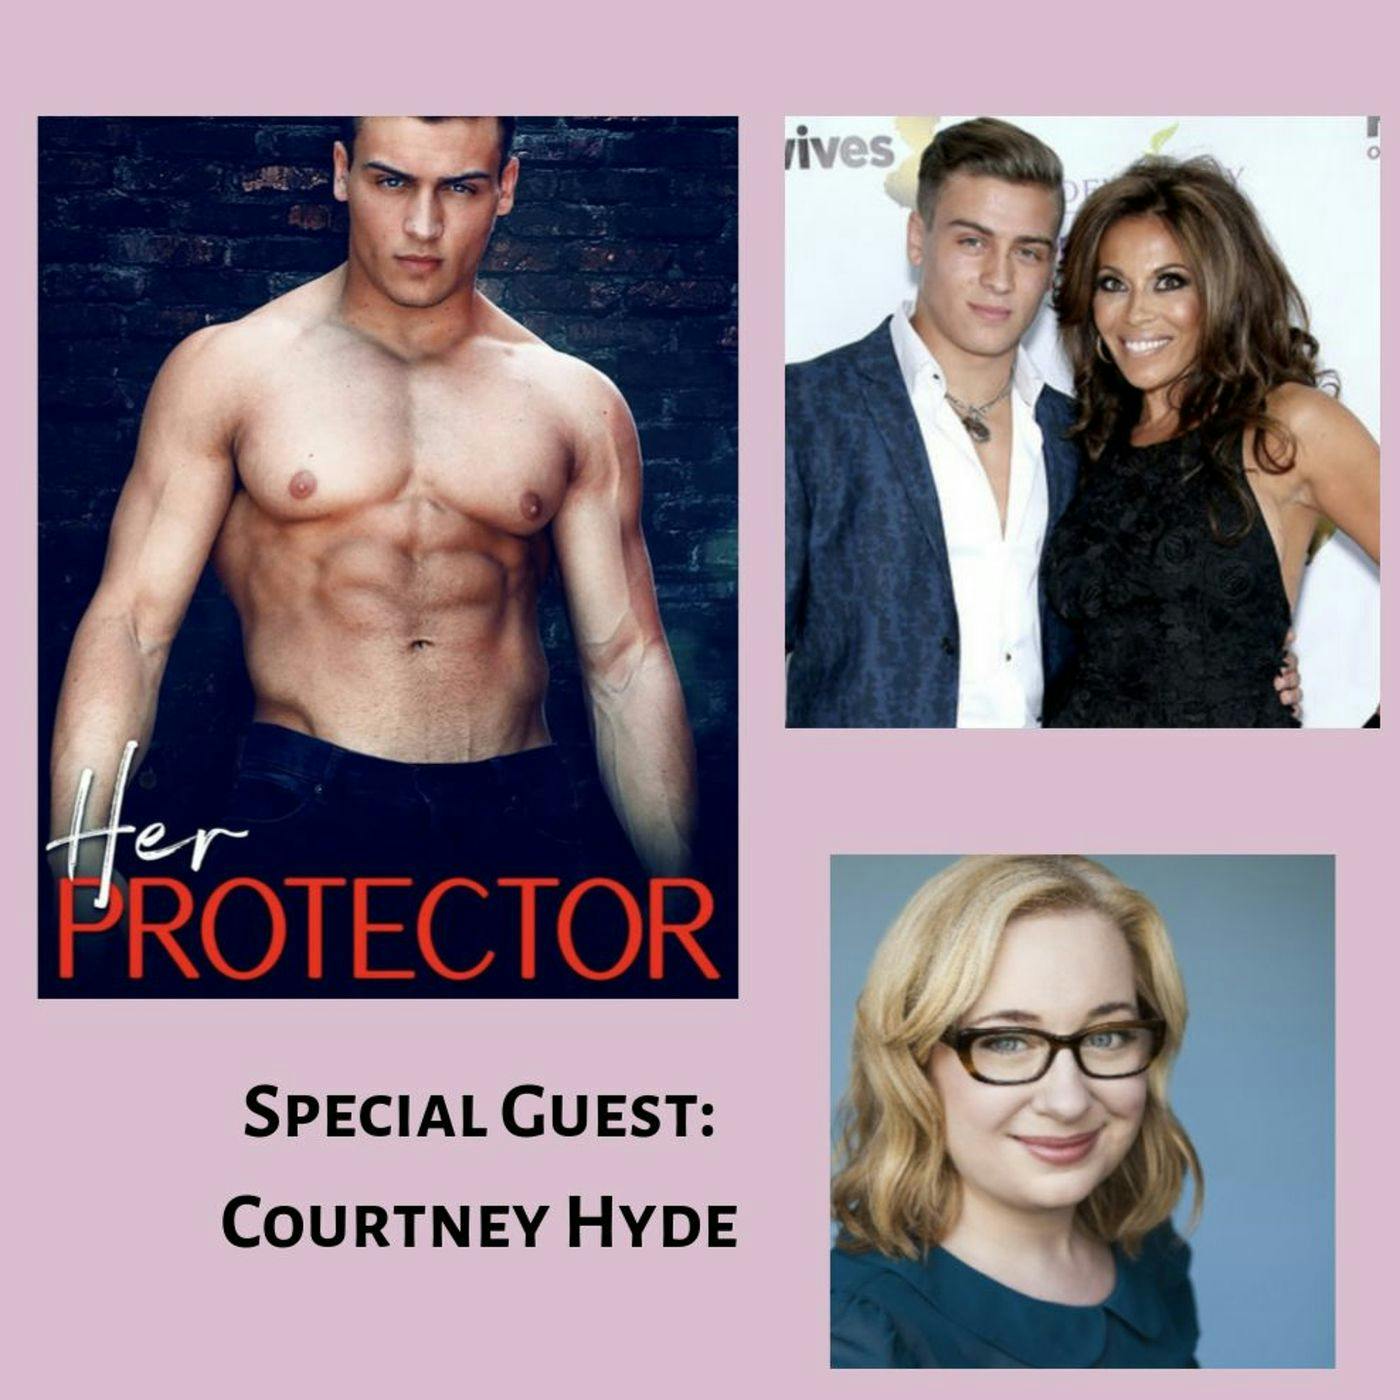 Her Protector with Courtney Hyde